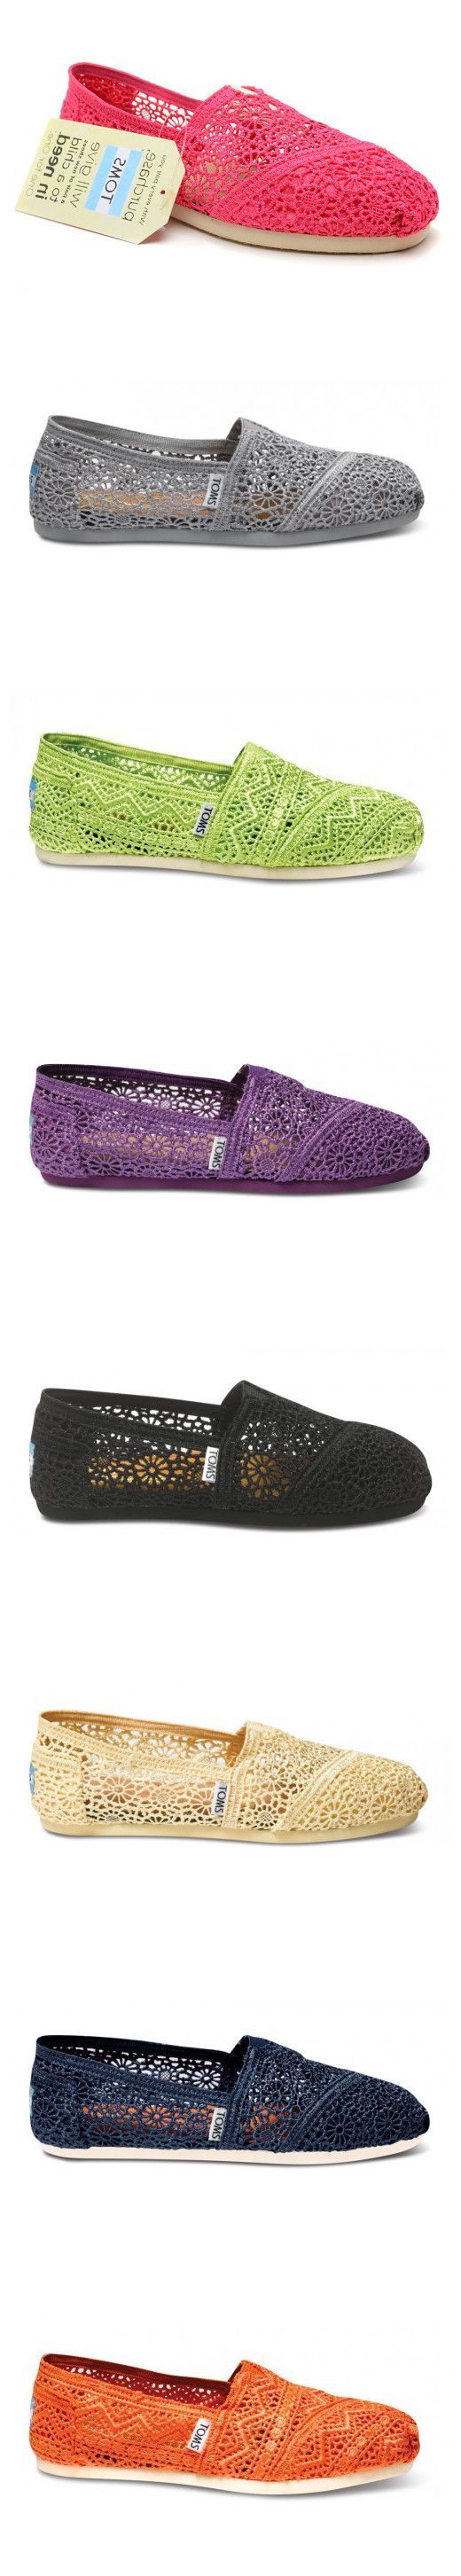 Toms Outlet! $26.99 and under